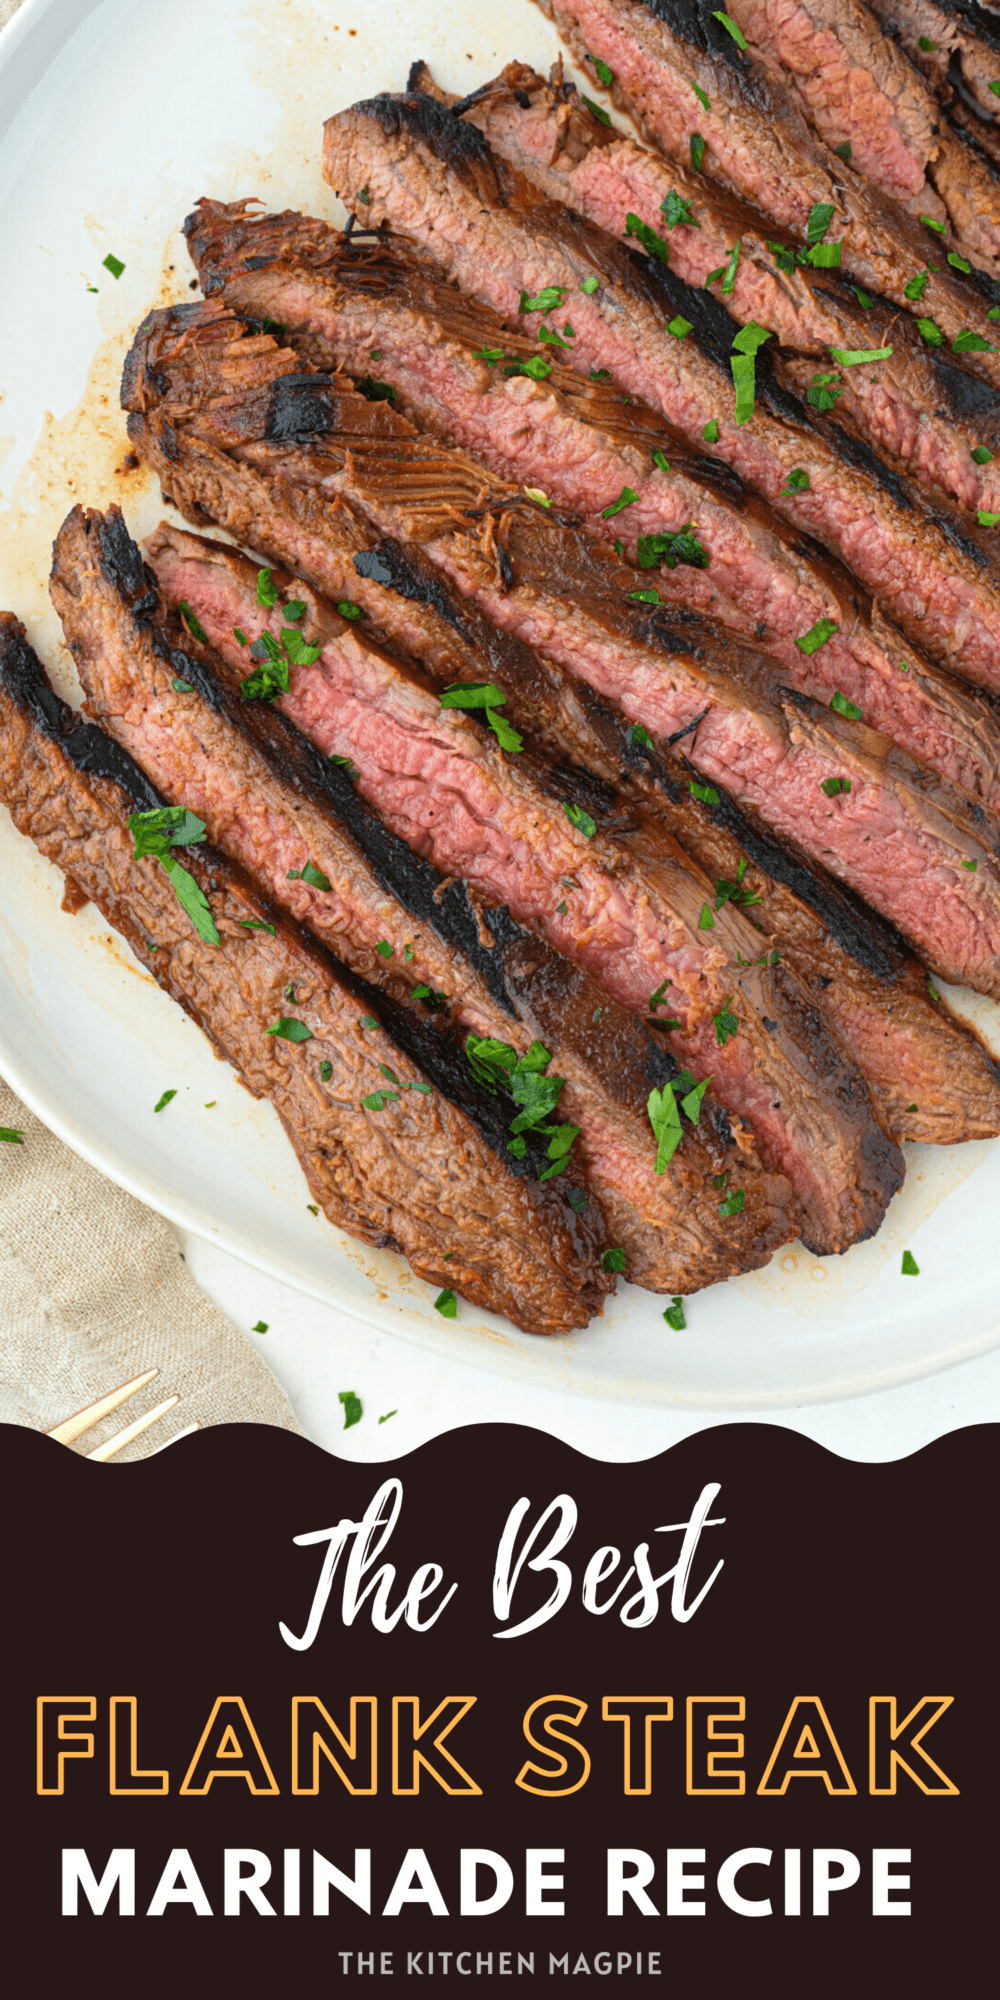 A good flank steak marinade turns a tougher piece of beef into a tender, juicy steak when marinated then grilled to perfection!